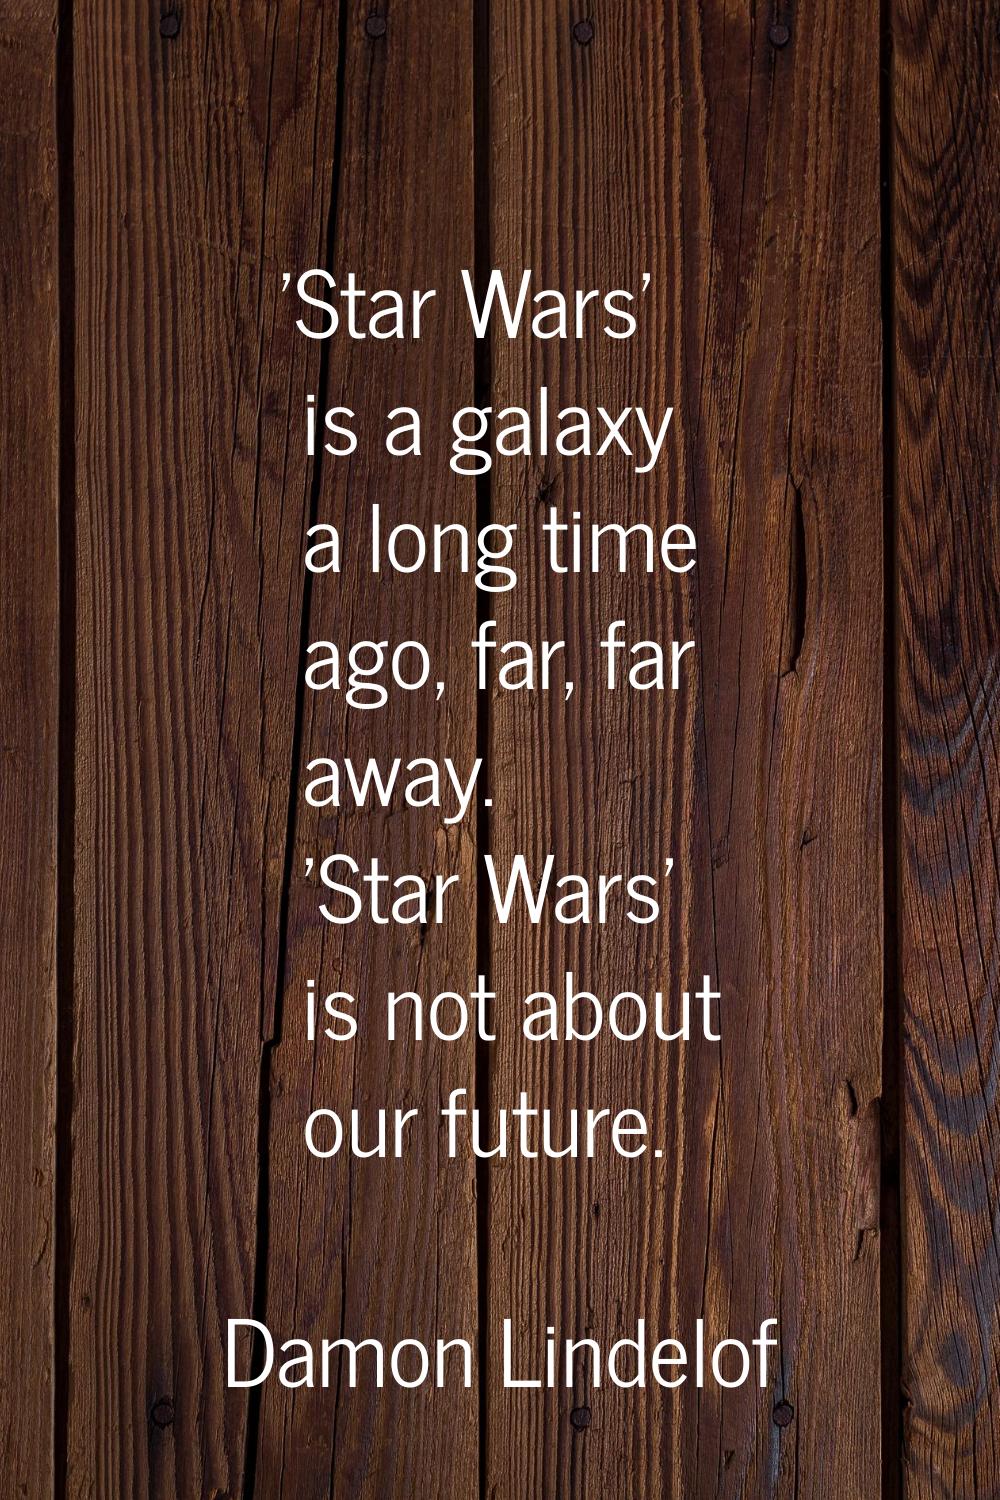 'Star Wars' is a galaxy a long time ago, far, far away. 'Star Wars' is not about our future.